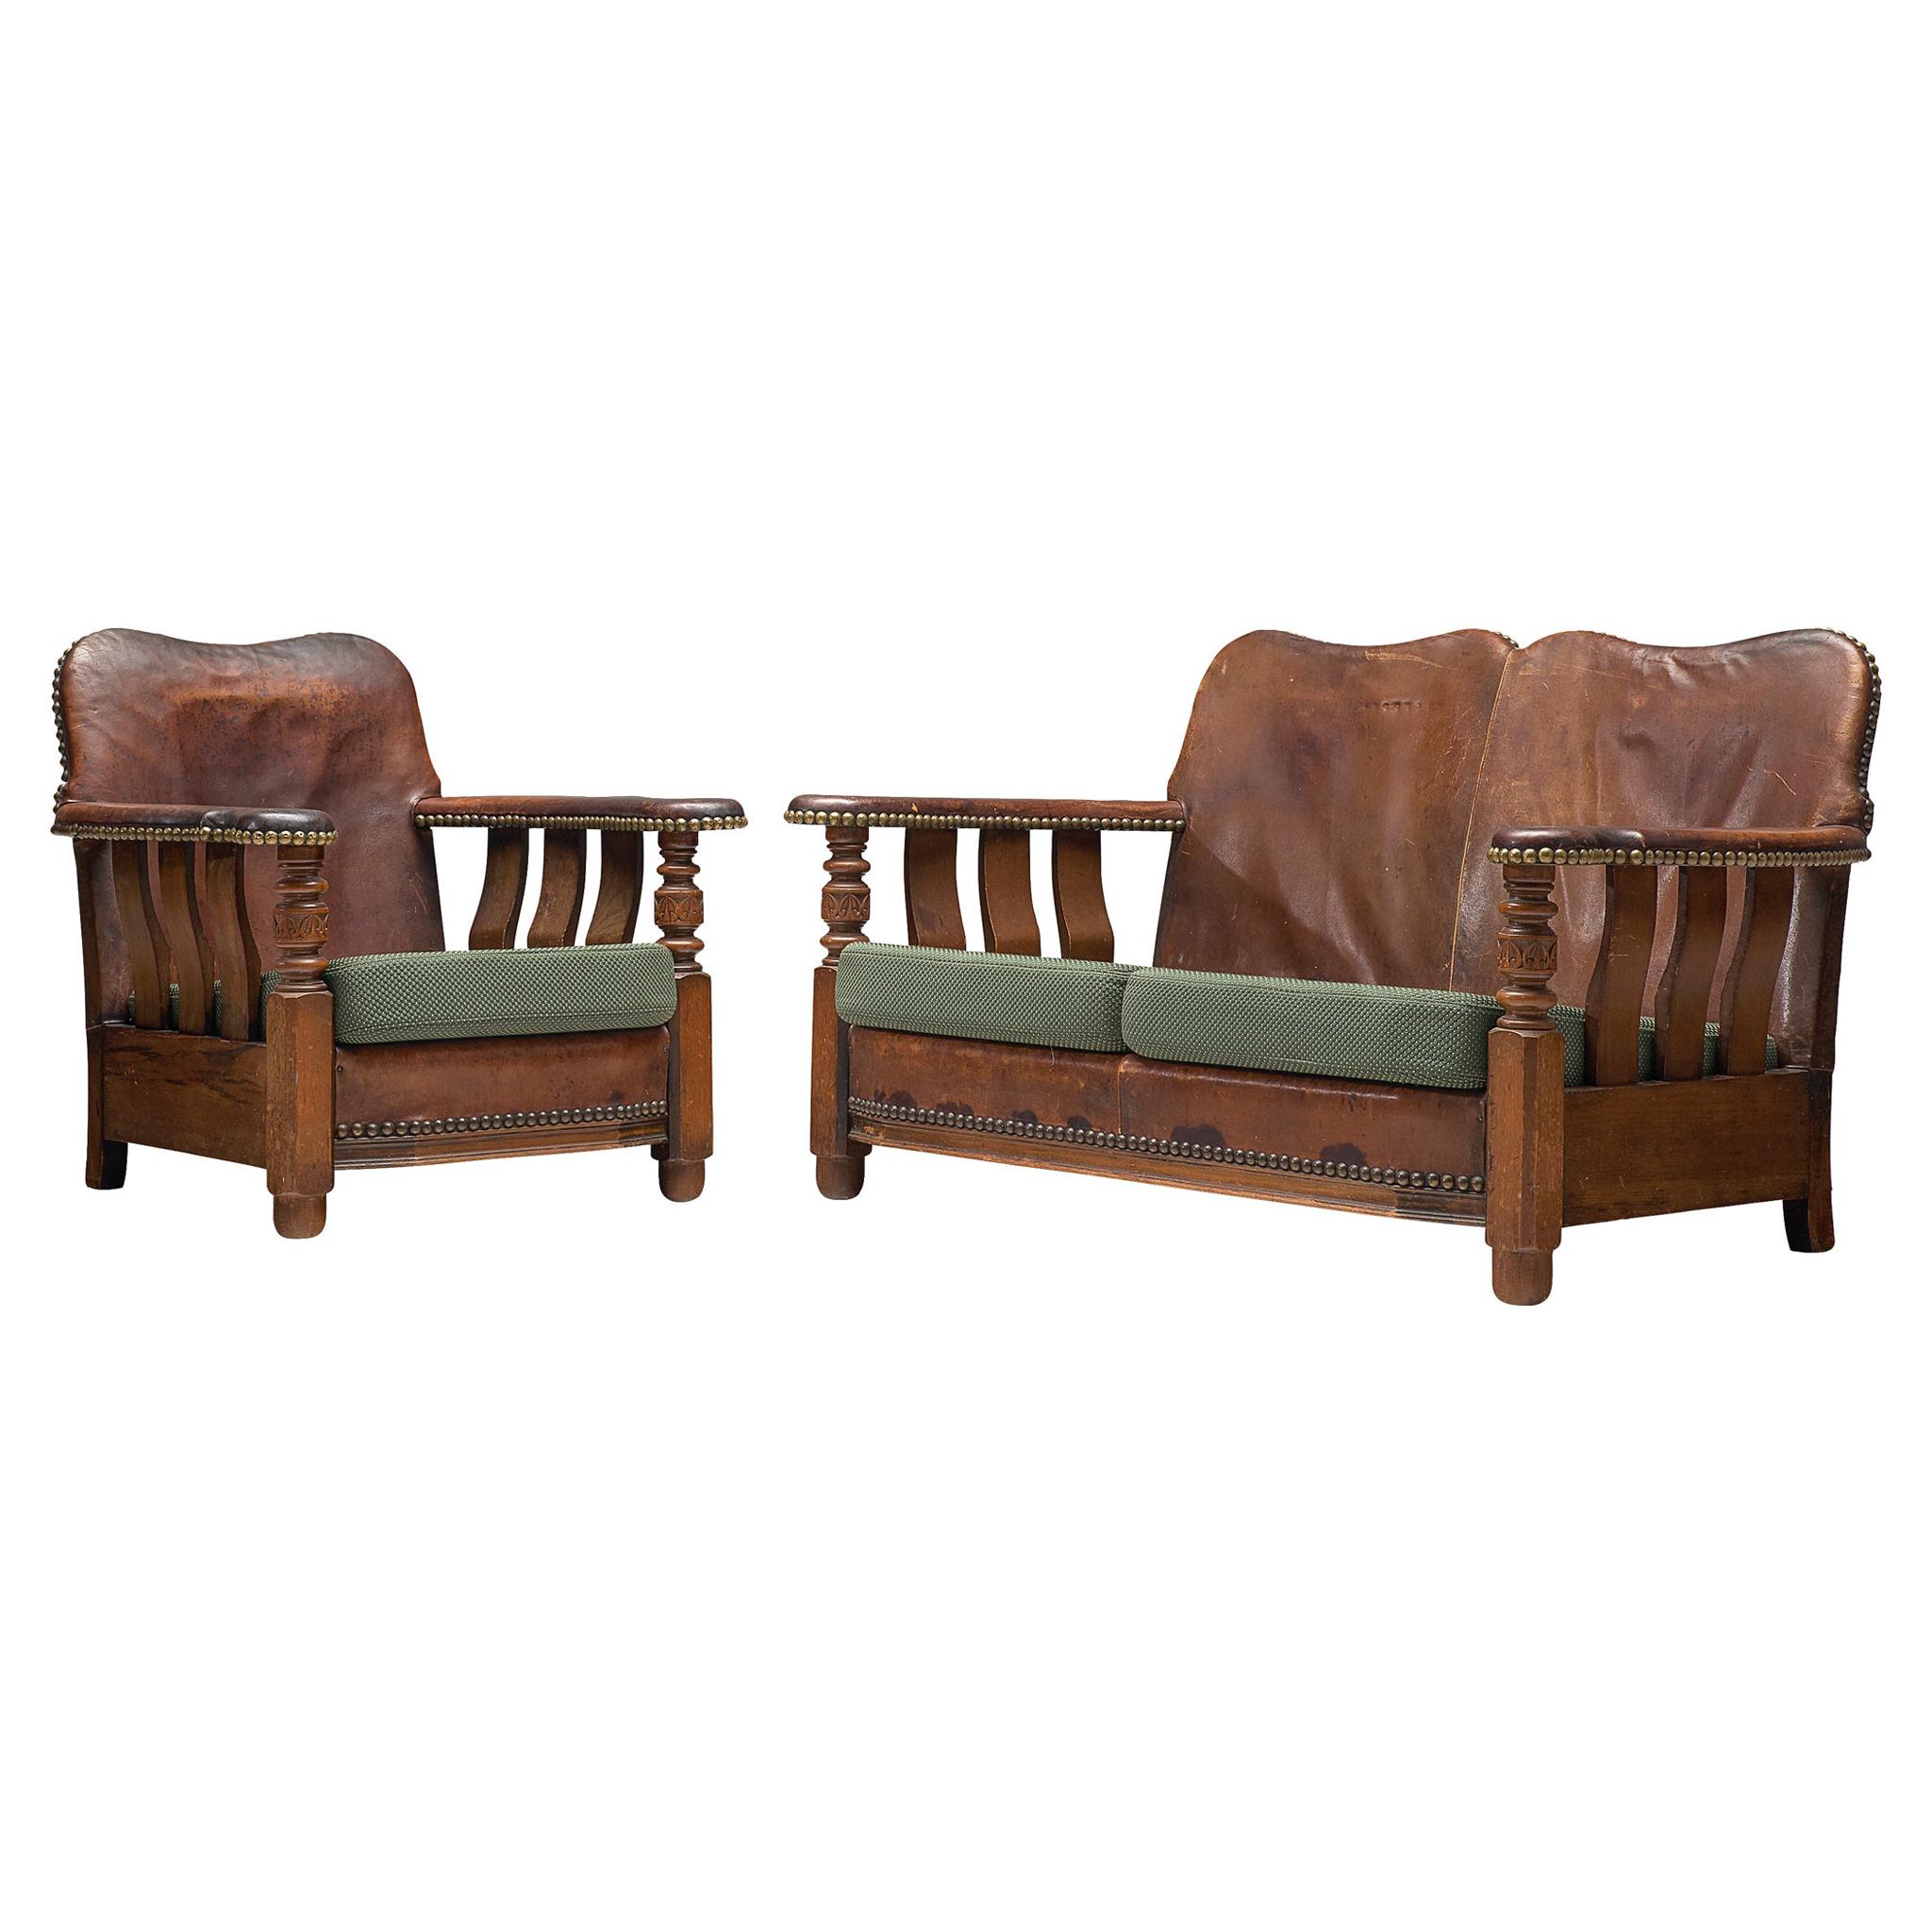 Early Danish Settee Sofa and Lounge Chair with Patinated Leather